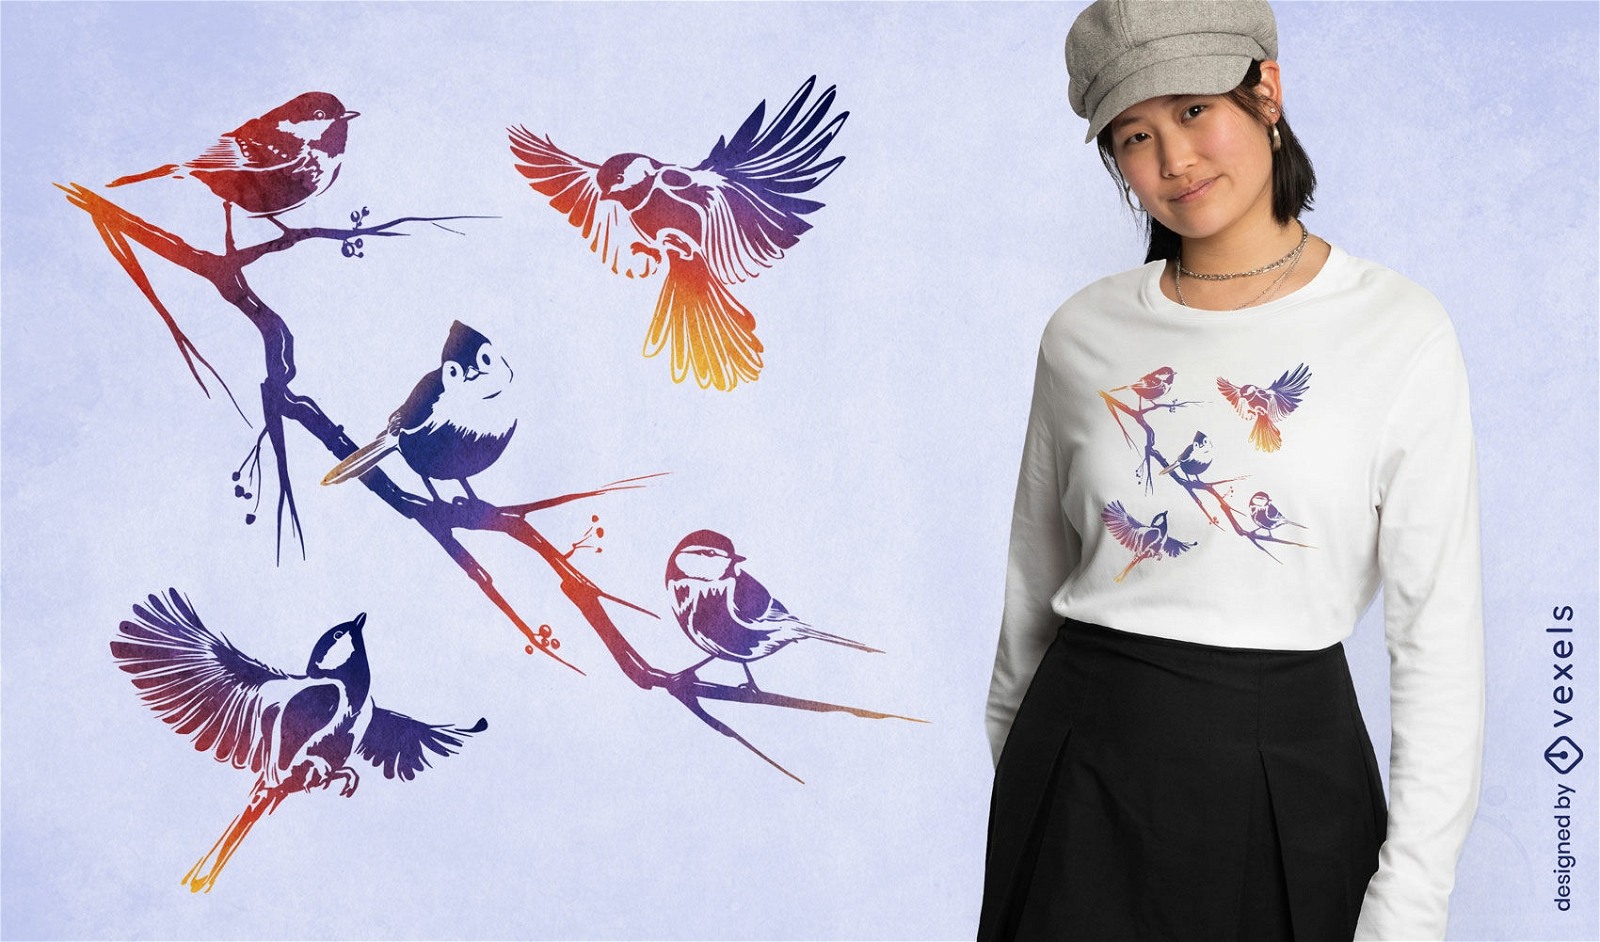 Branch with birds flying t-shirt design